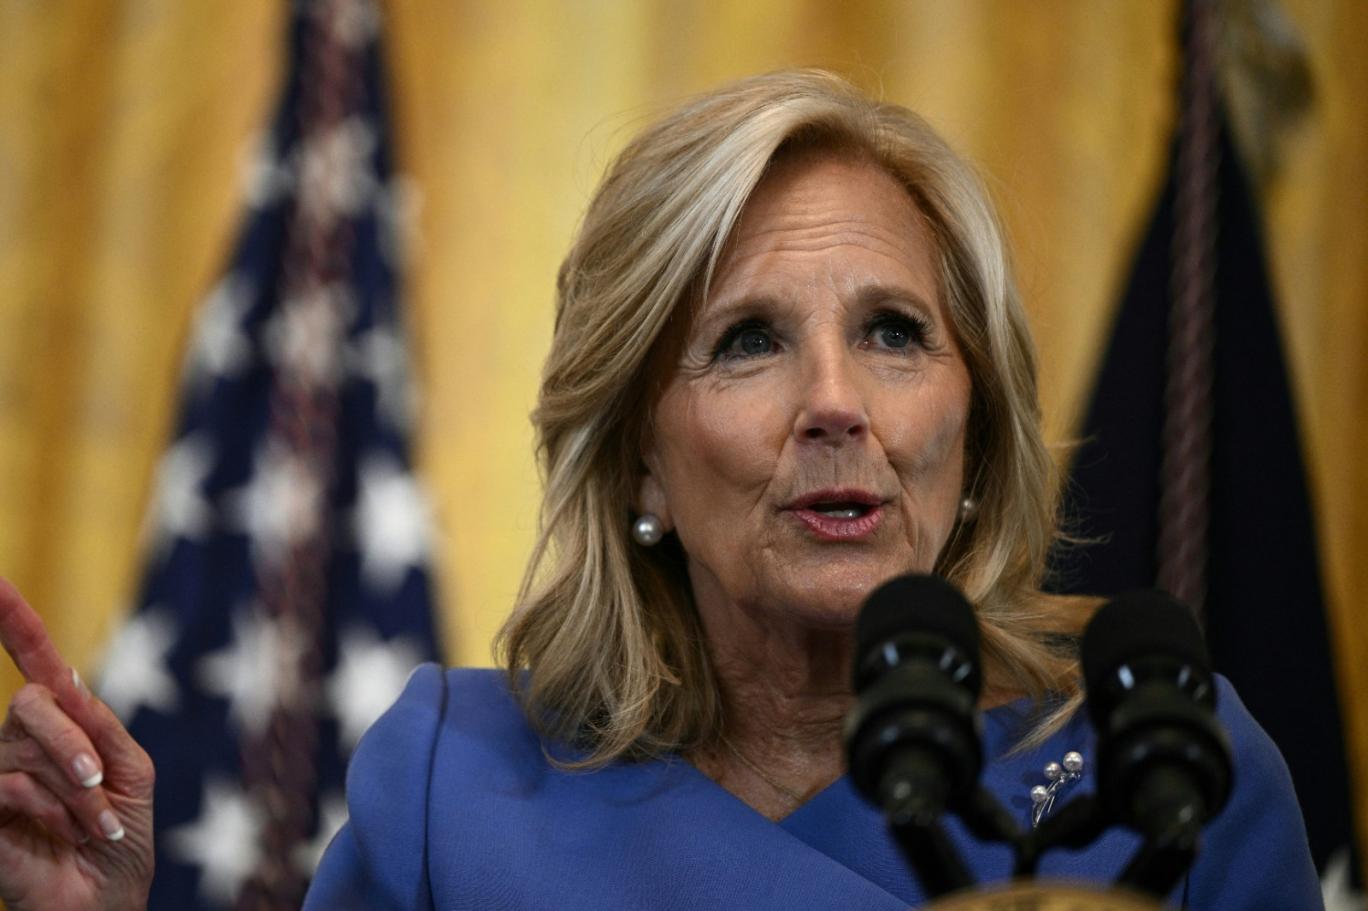 First Lady Jill Biden's special request to her husband: "Stop the suffering of Gaza"